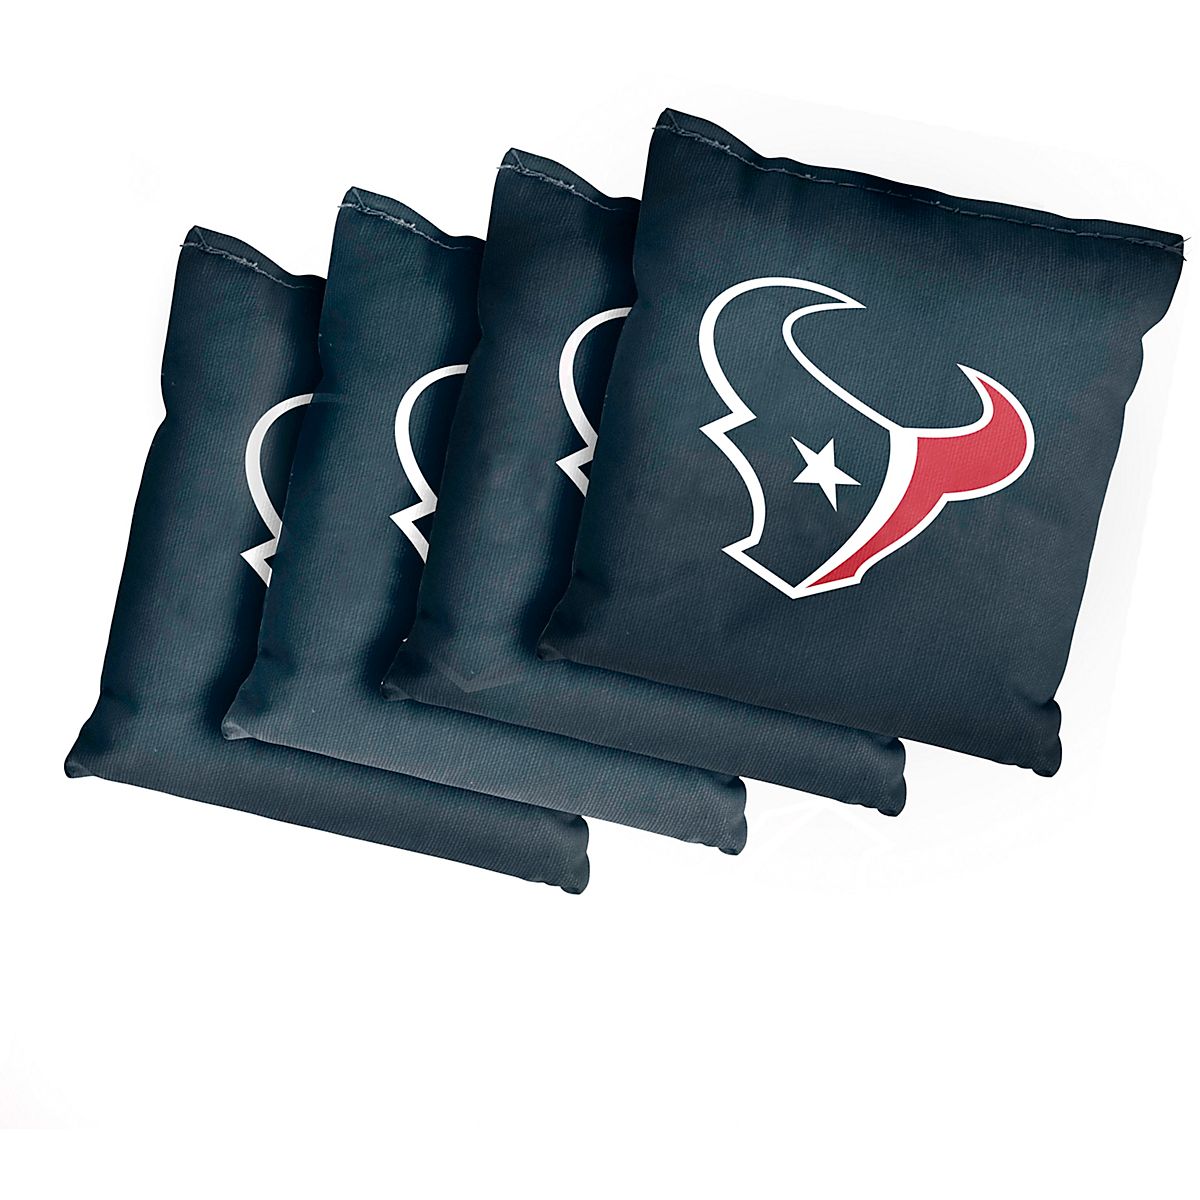 Tarleton State Texans Victory Tailgate NCAA Collegiate Regulation Cornhole Game Bag Set 8 Bags Included, Corn-Filled